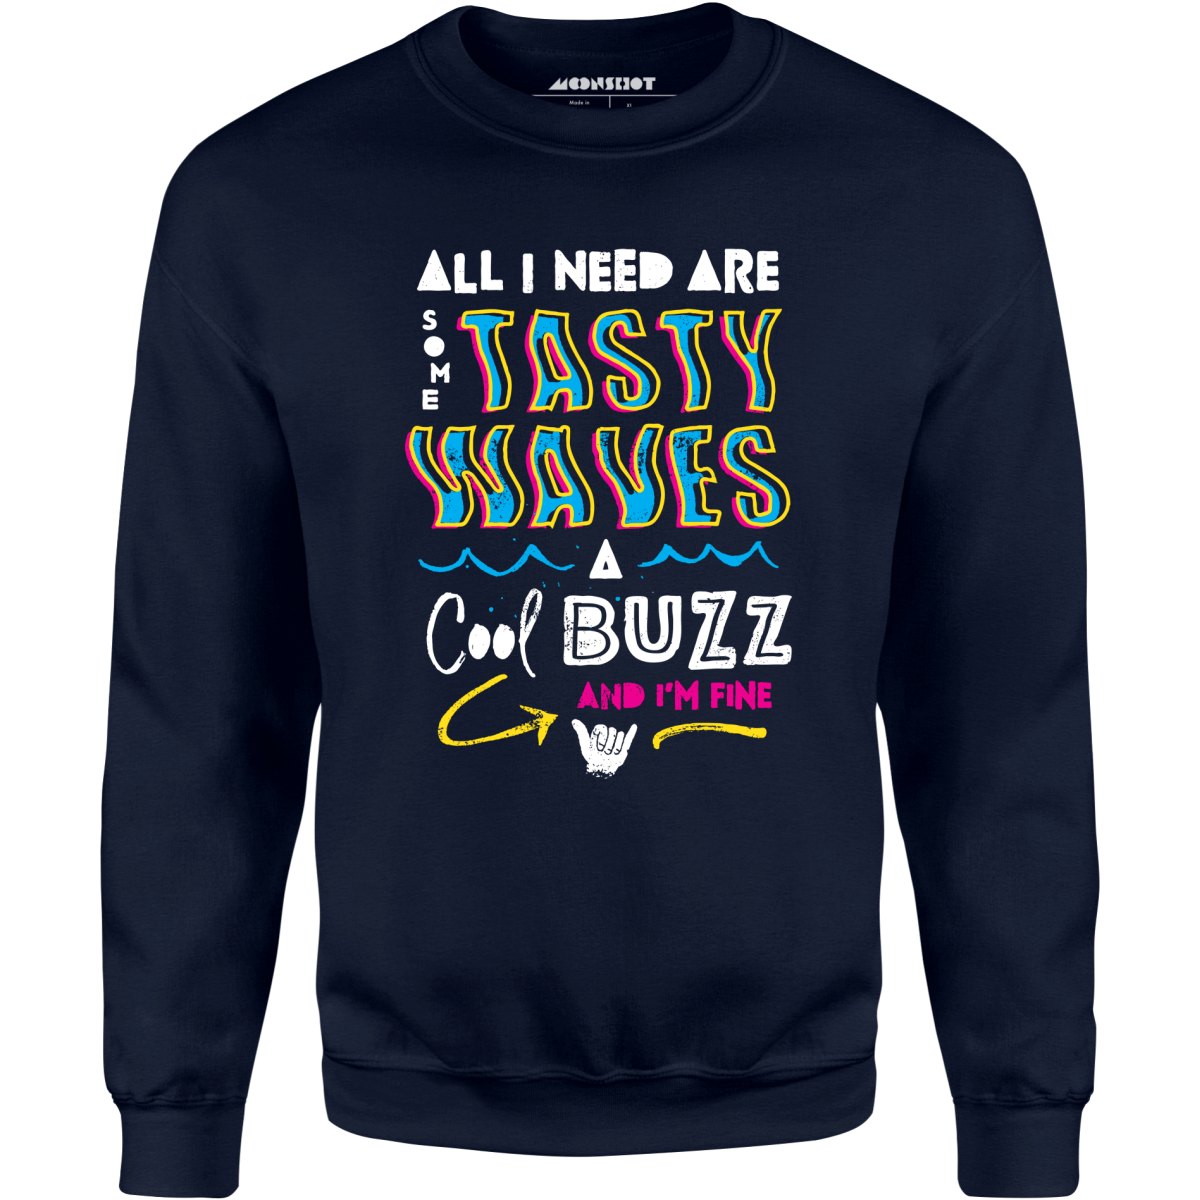 All I Need Are Some Tasty Waves a Cool Buzz and I'm Fine - Unisex Sweatshirt